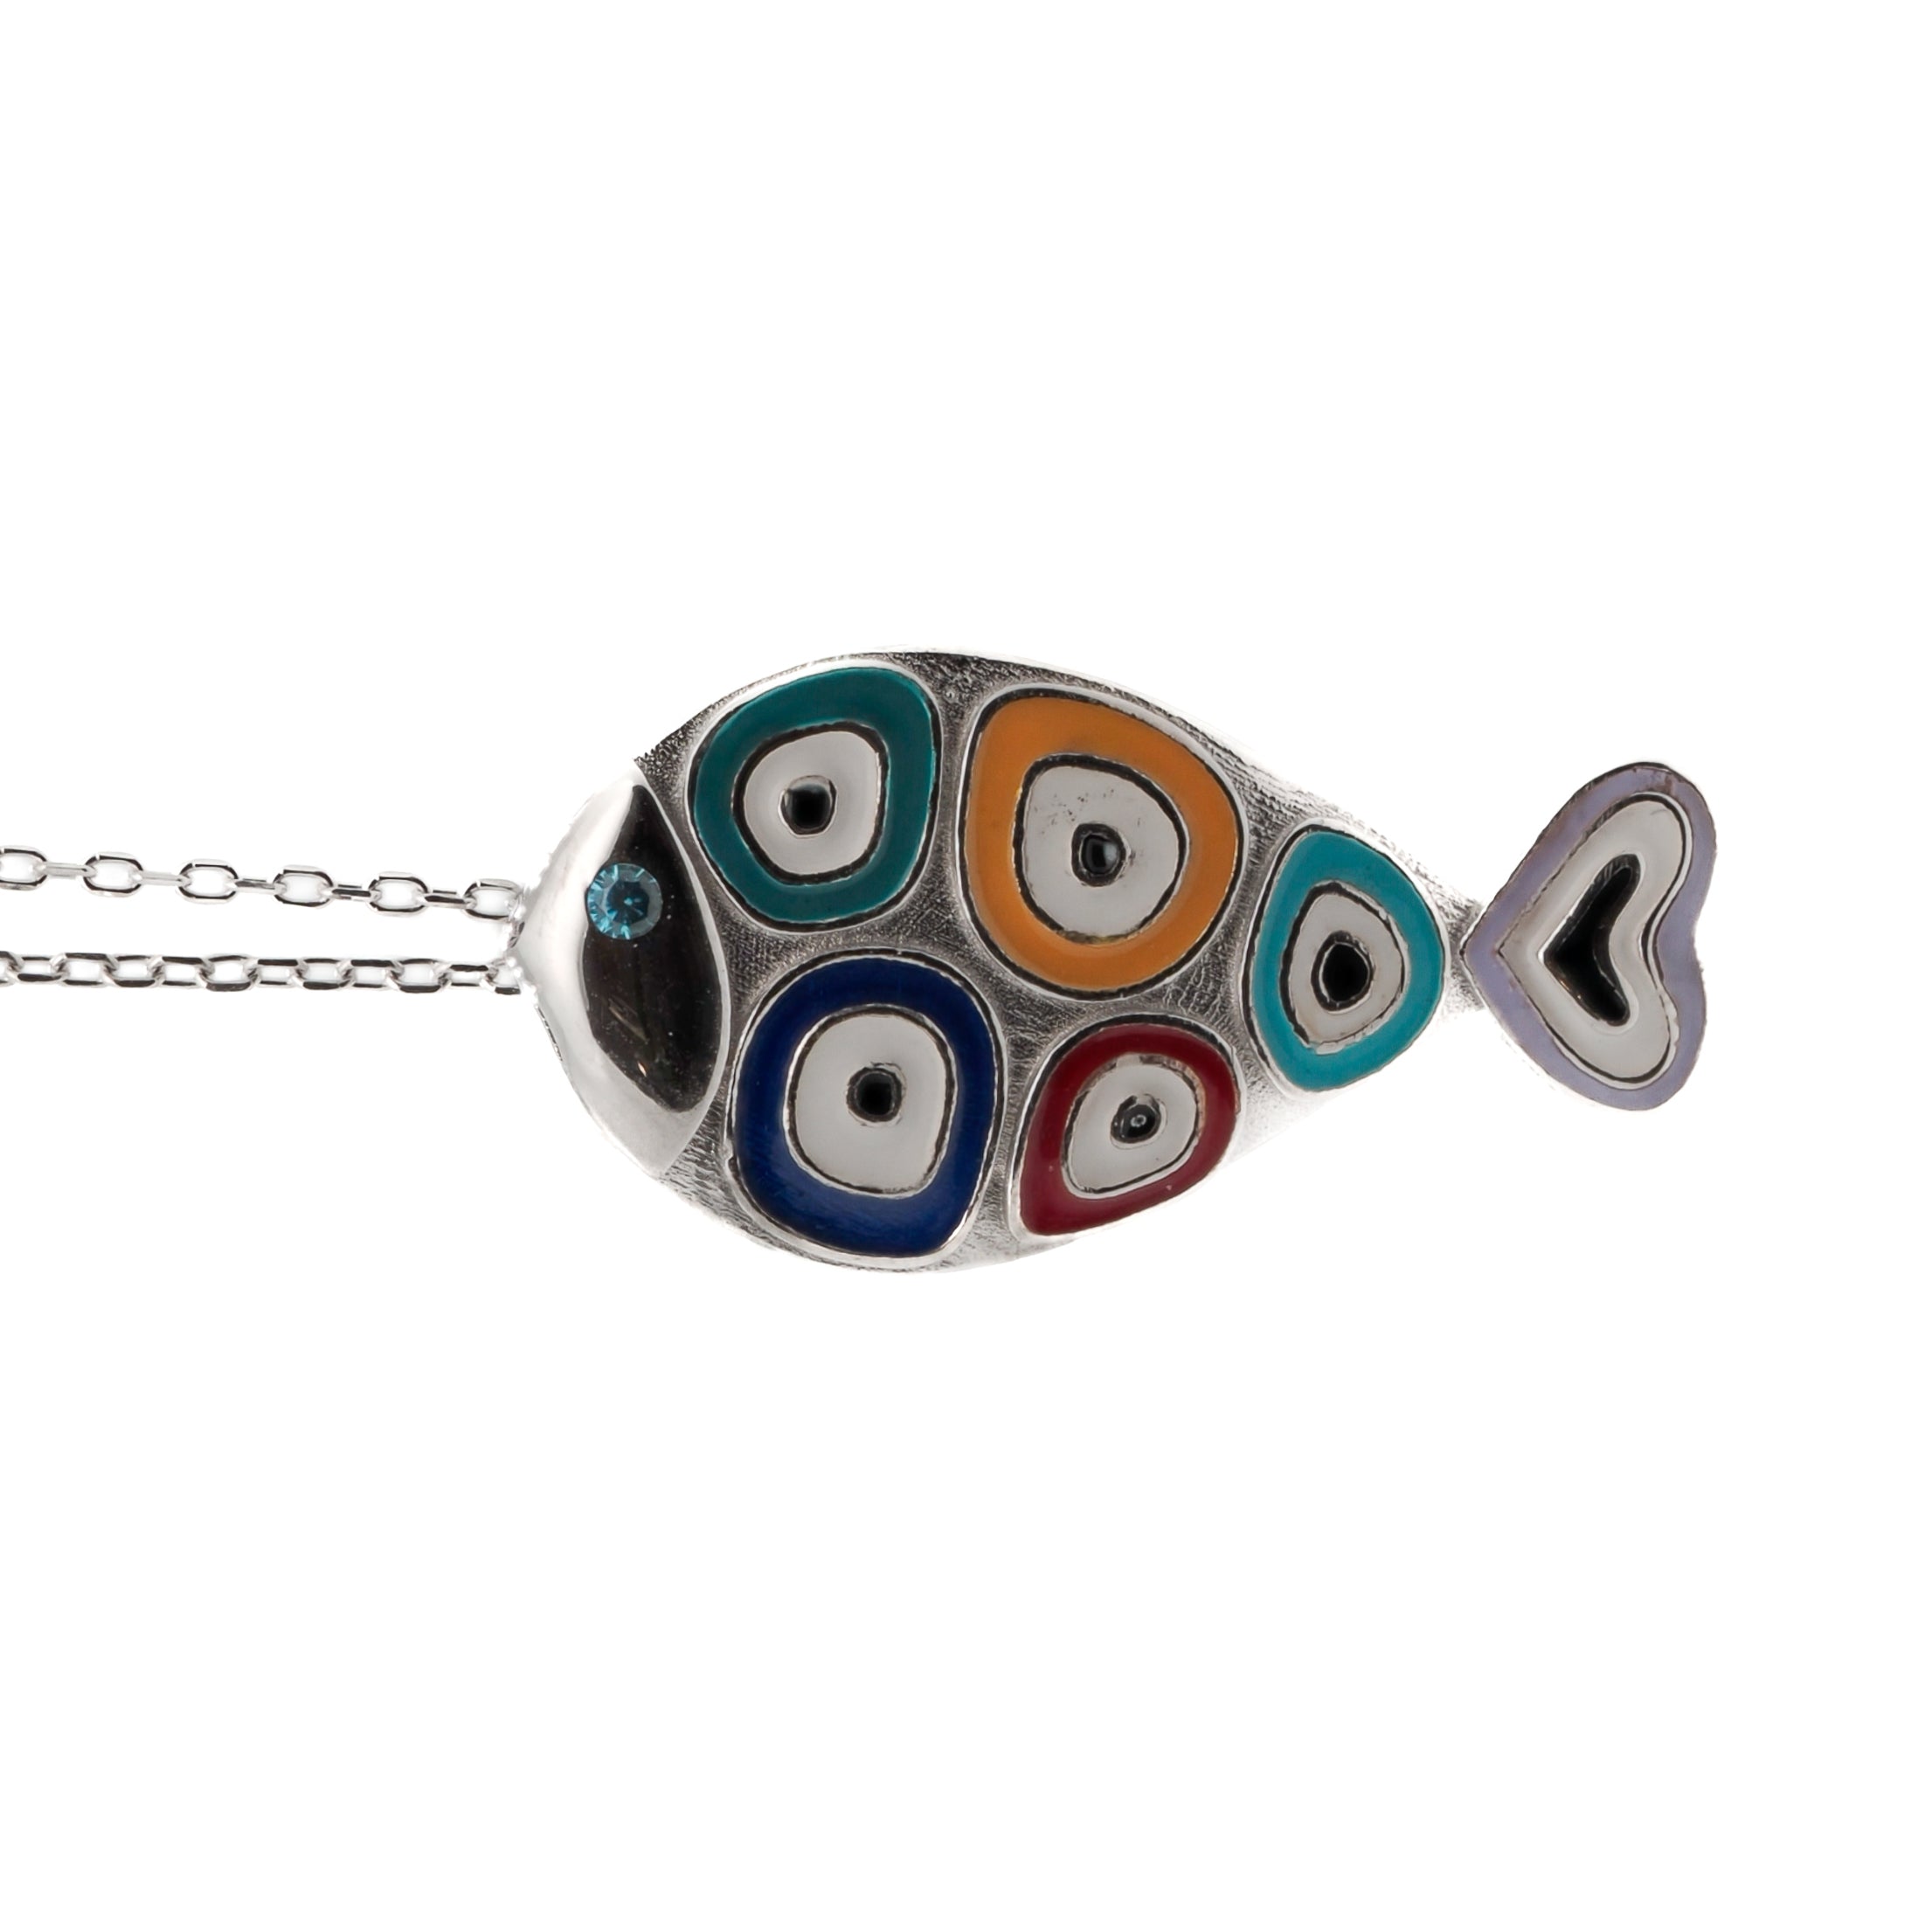 A close-up of the Silver Evil Eye Fish Necklace, highlighting the detailed fish pendant and vibrant evil eye accents.